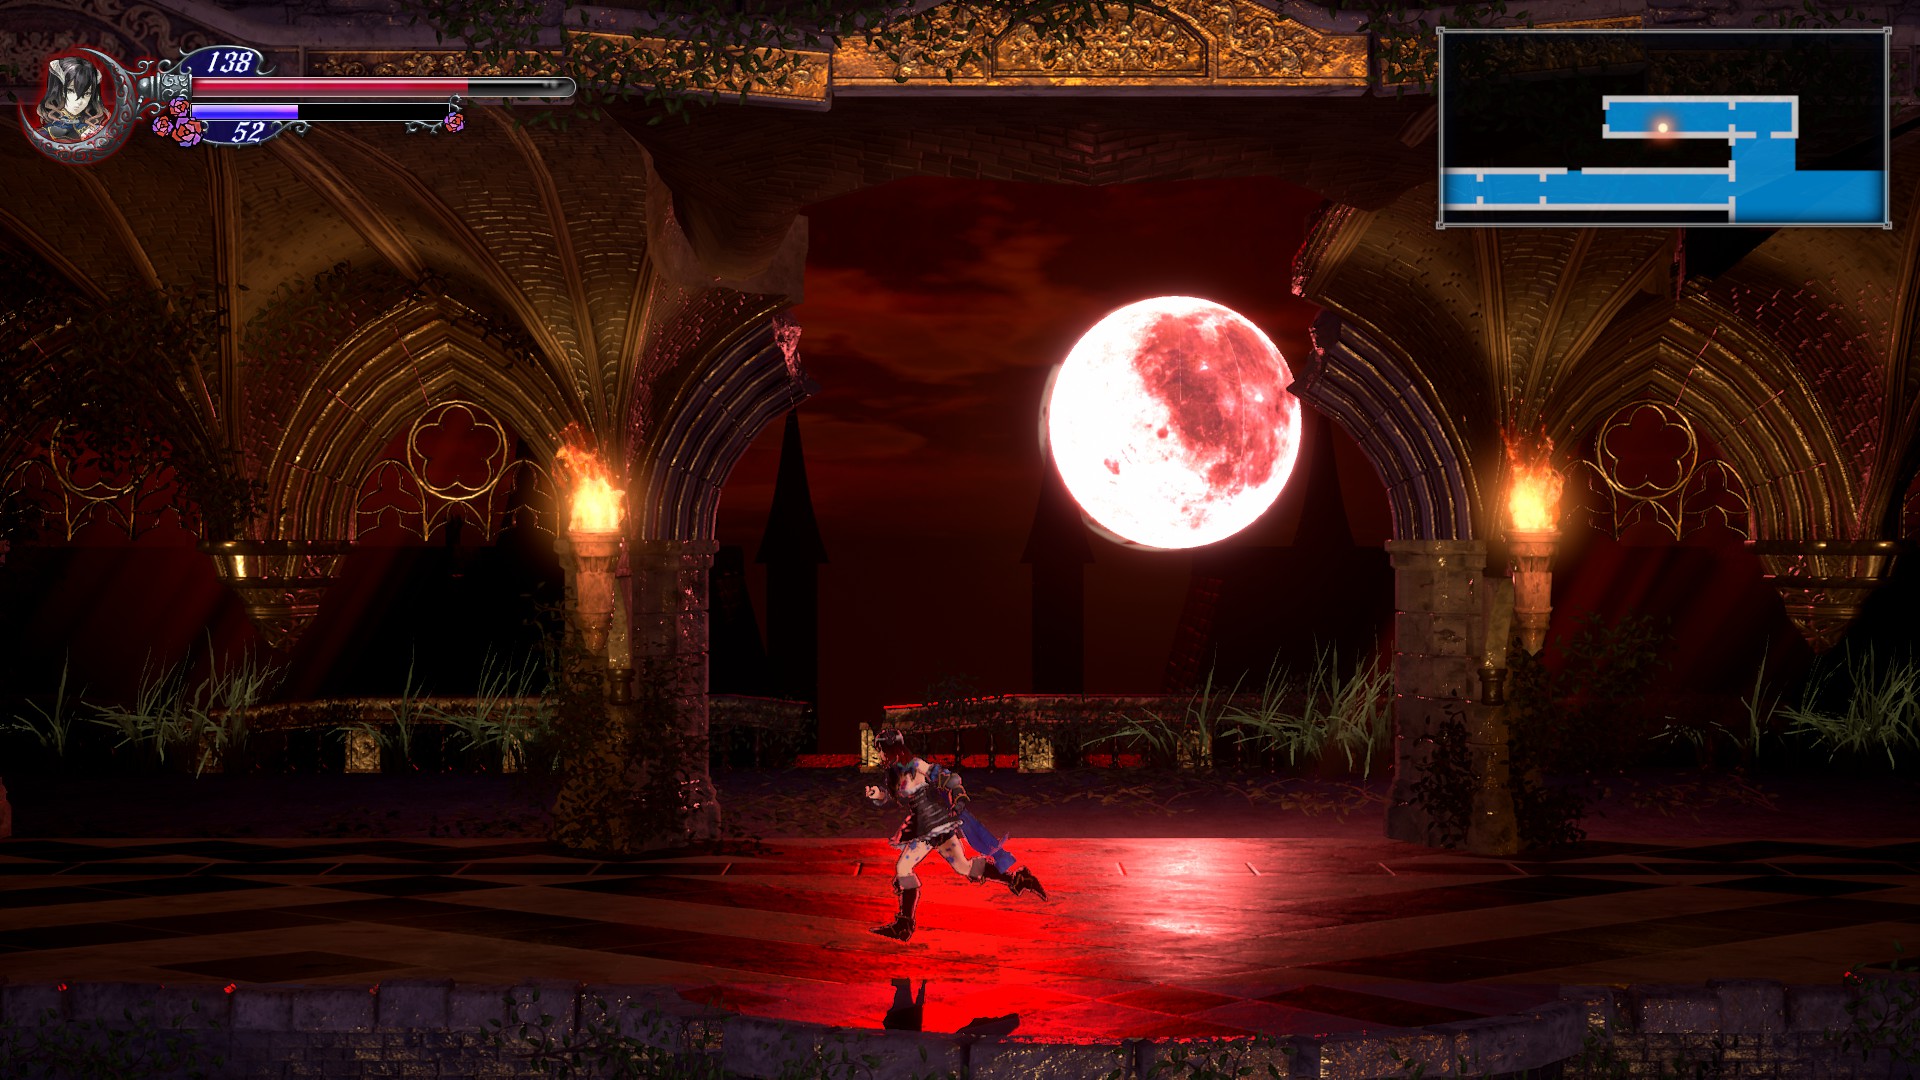 Bloodstained: Ritual of the Night,ブラッドステインド：リチュアル・オブ・ザ・ナイト,505 Games,五十嵐孝司,PC,GSE,